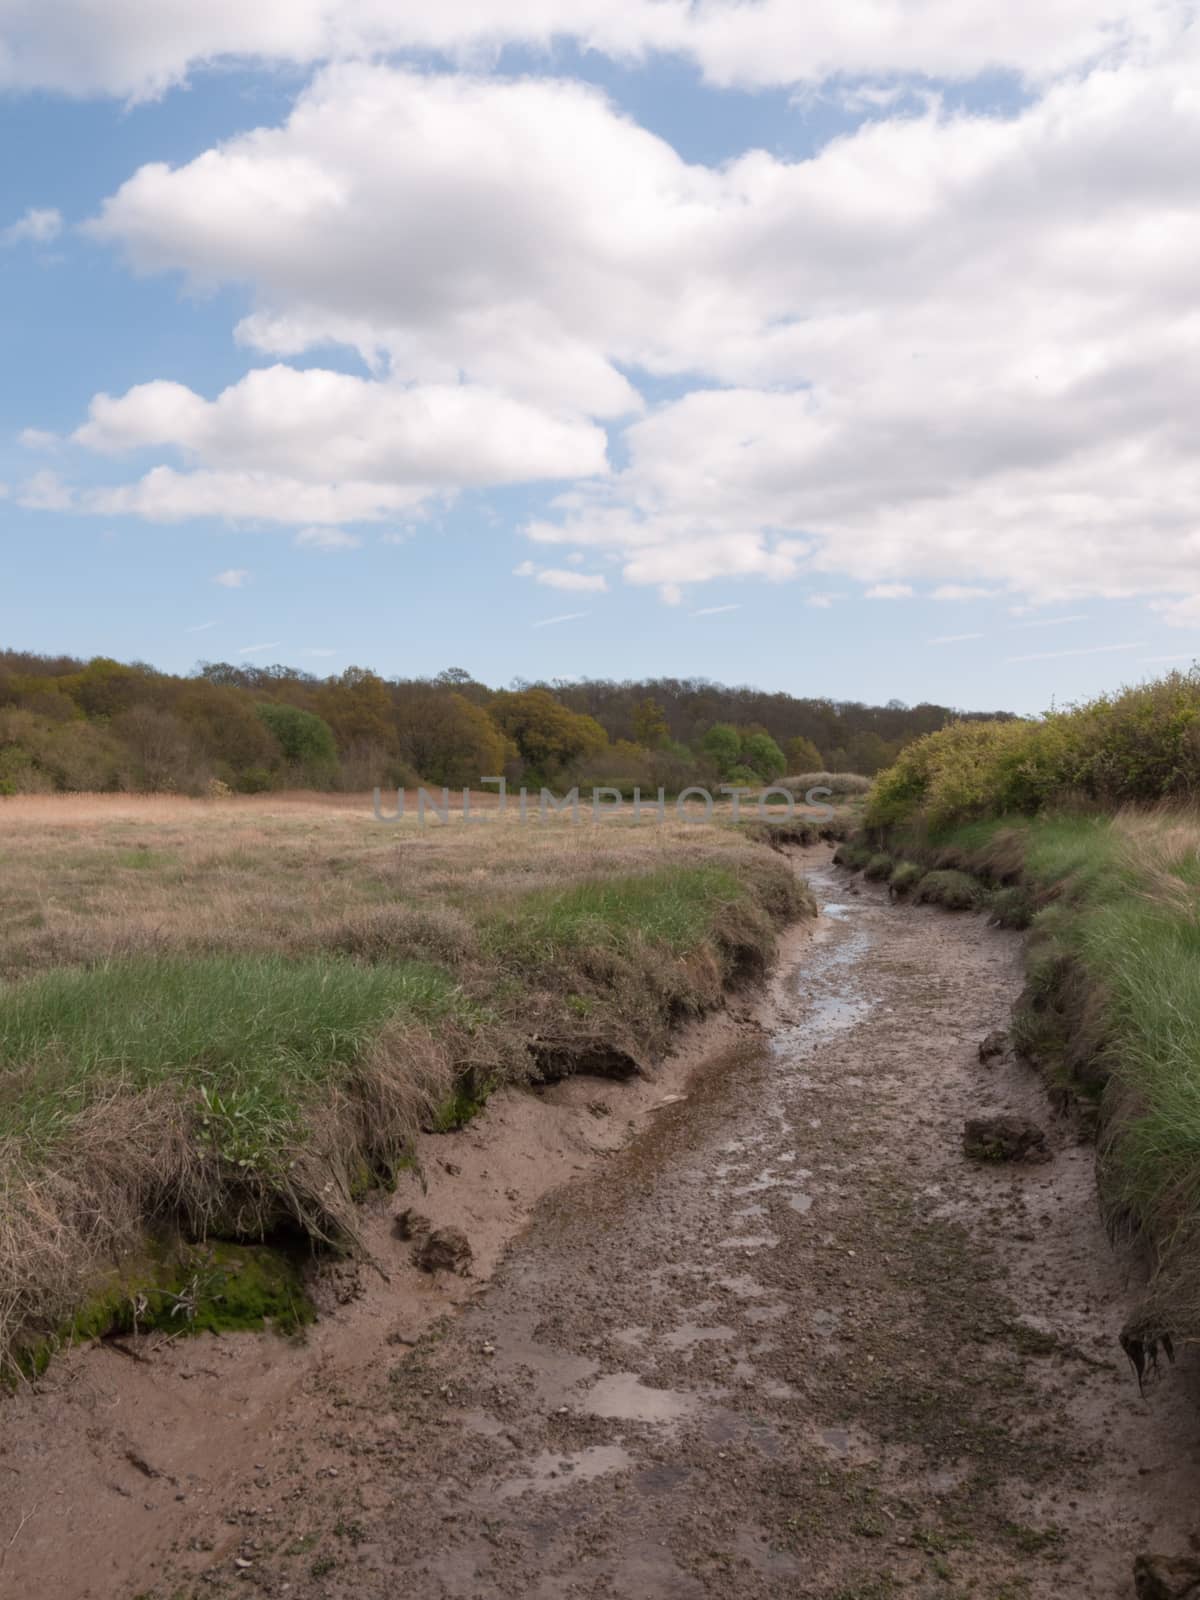 a shallow ditch of shining mud outside in a field in the country next to a running river, taken from a bridge in day time with white clouds overhead in the blue sky in spring